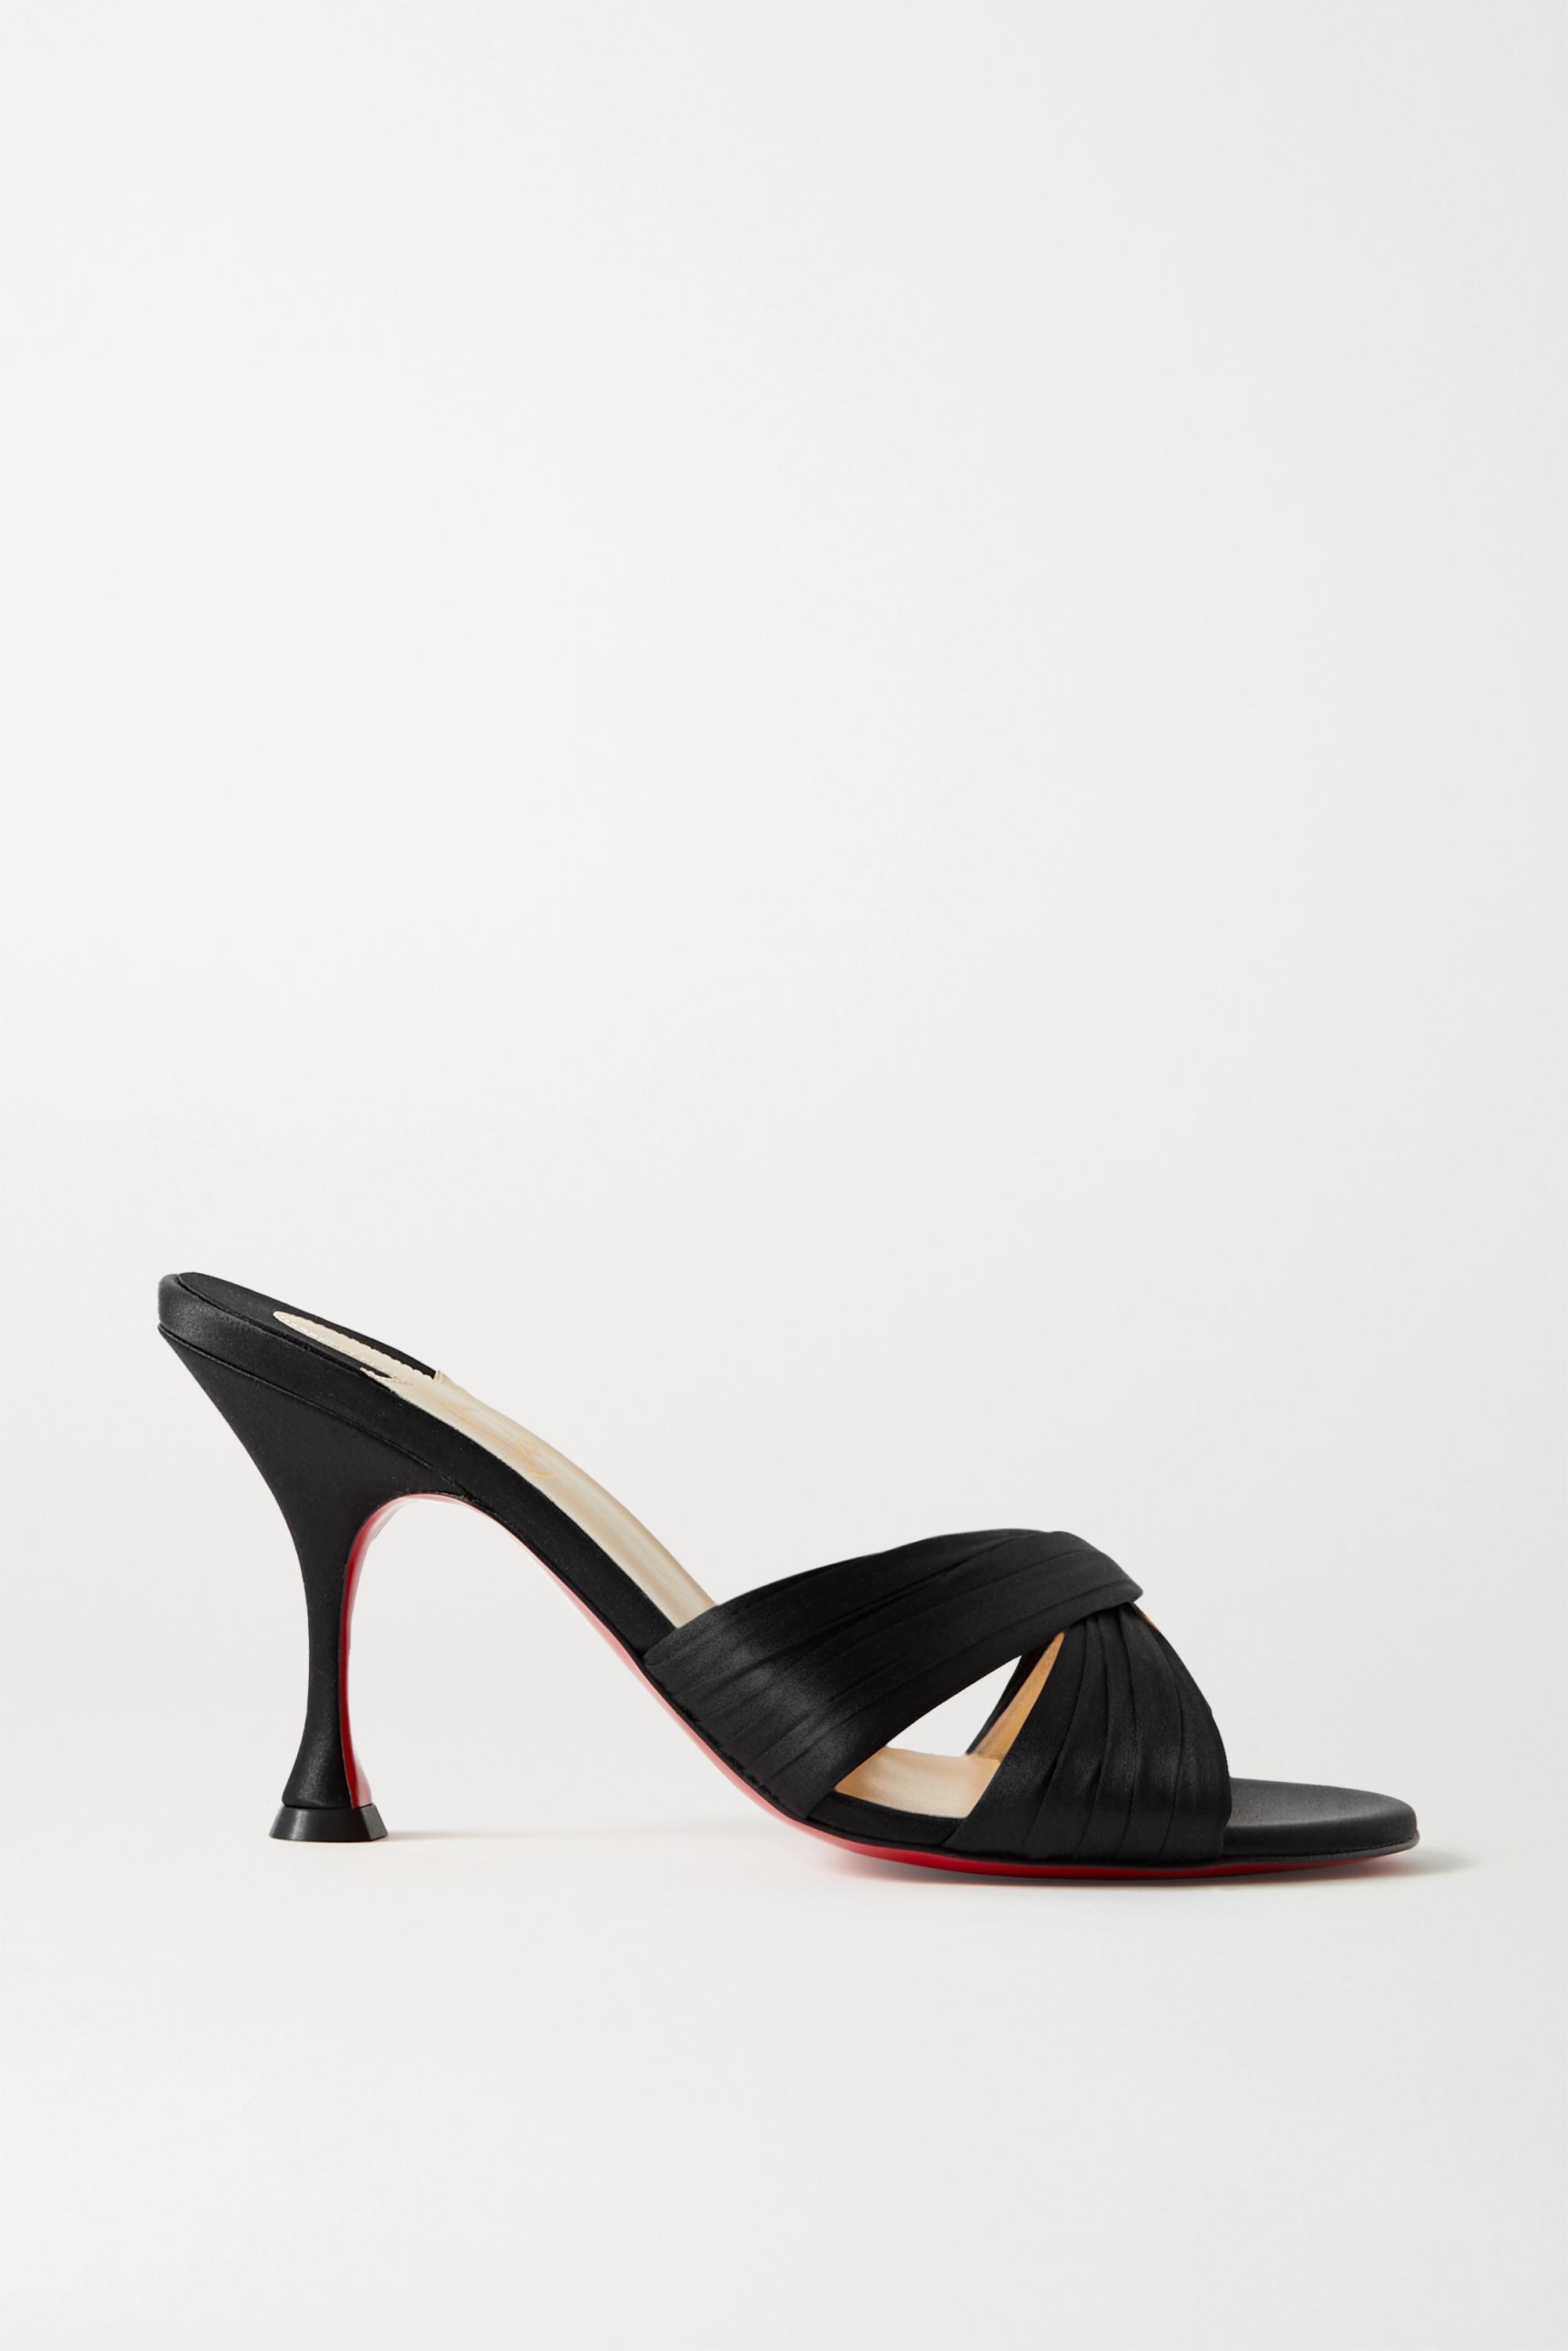 Christian Louboutin Nicol Is Back Satin Mules in Black | Lyst Canada